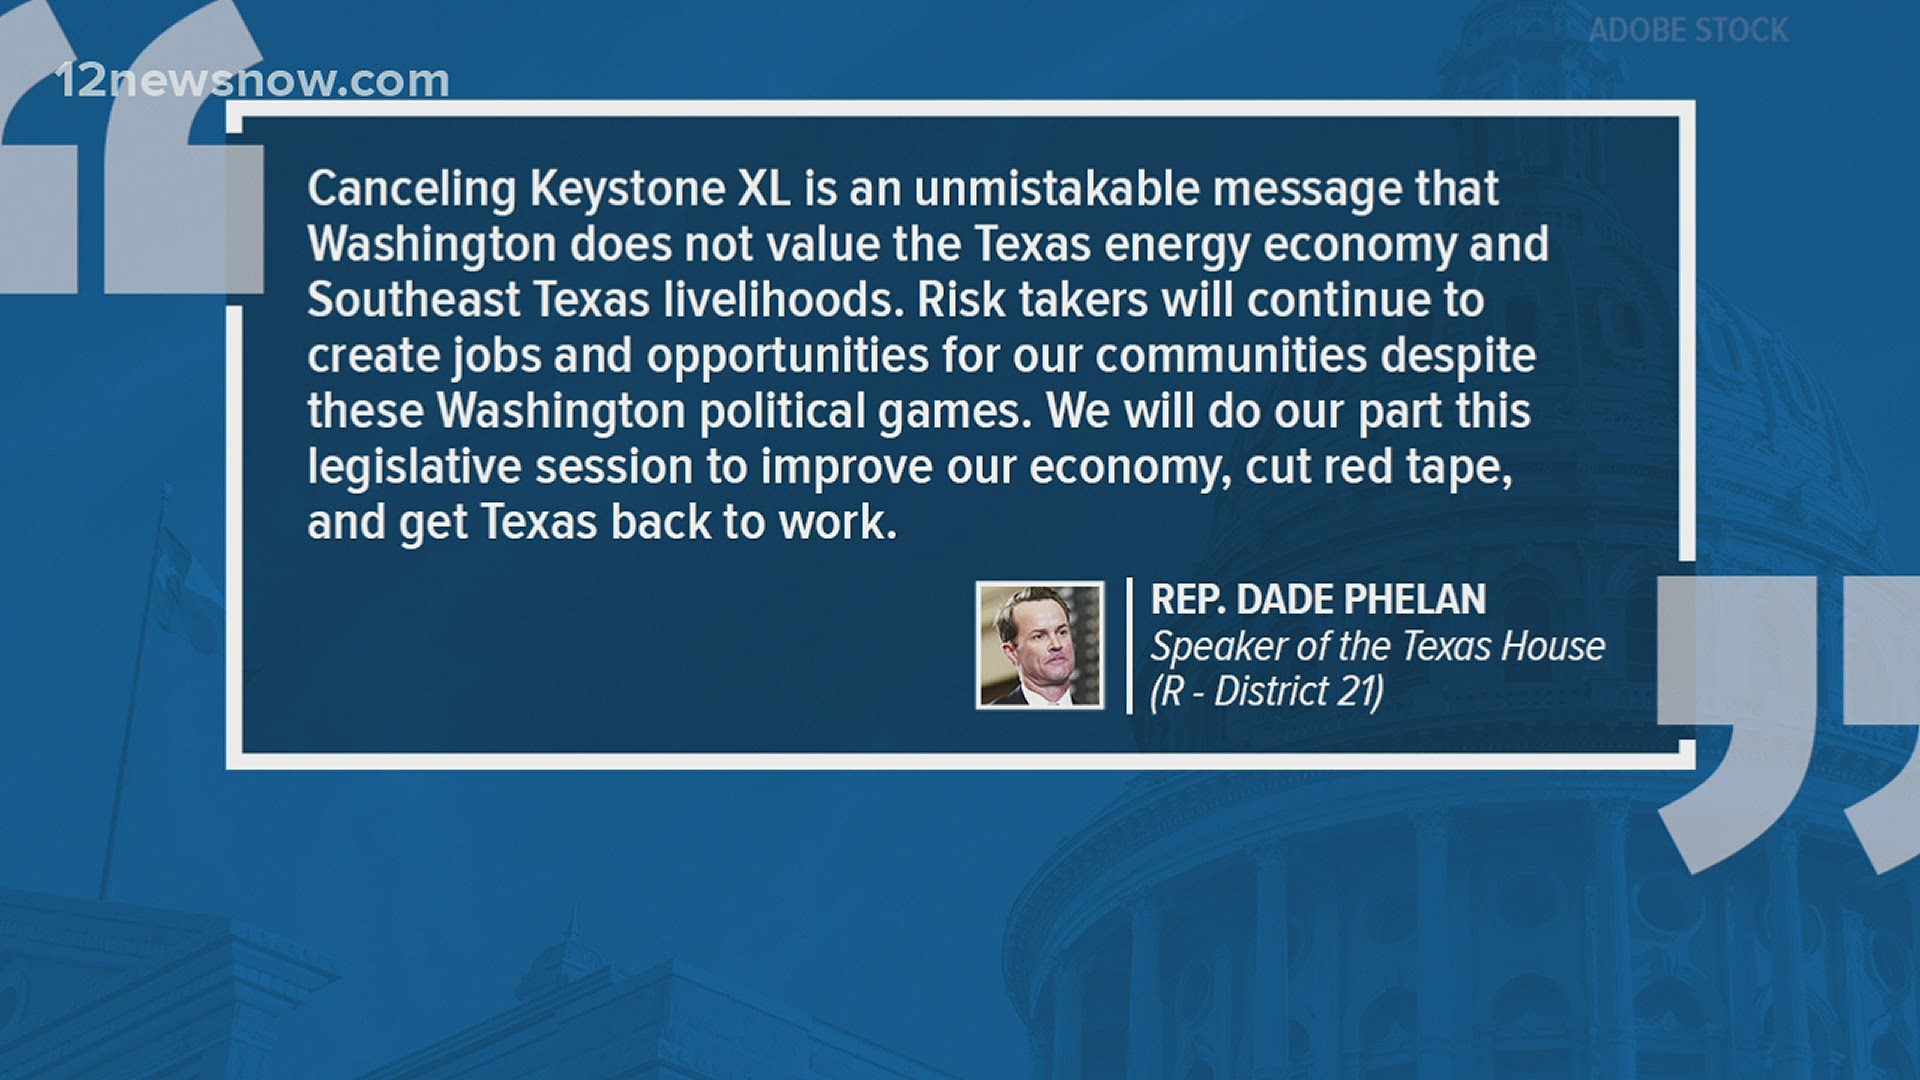 The Texas representative says he's working to get Texans back to work.